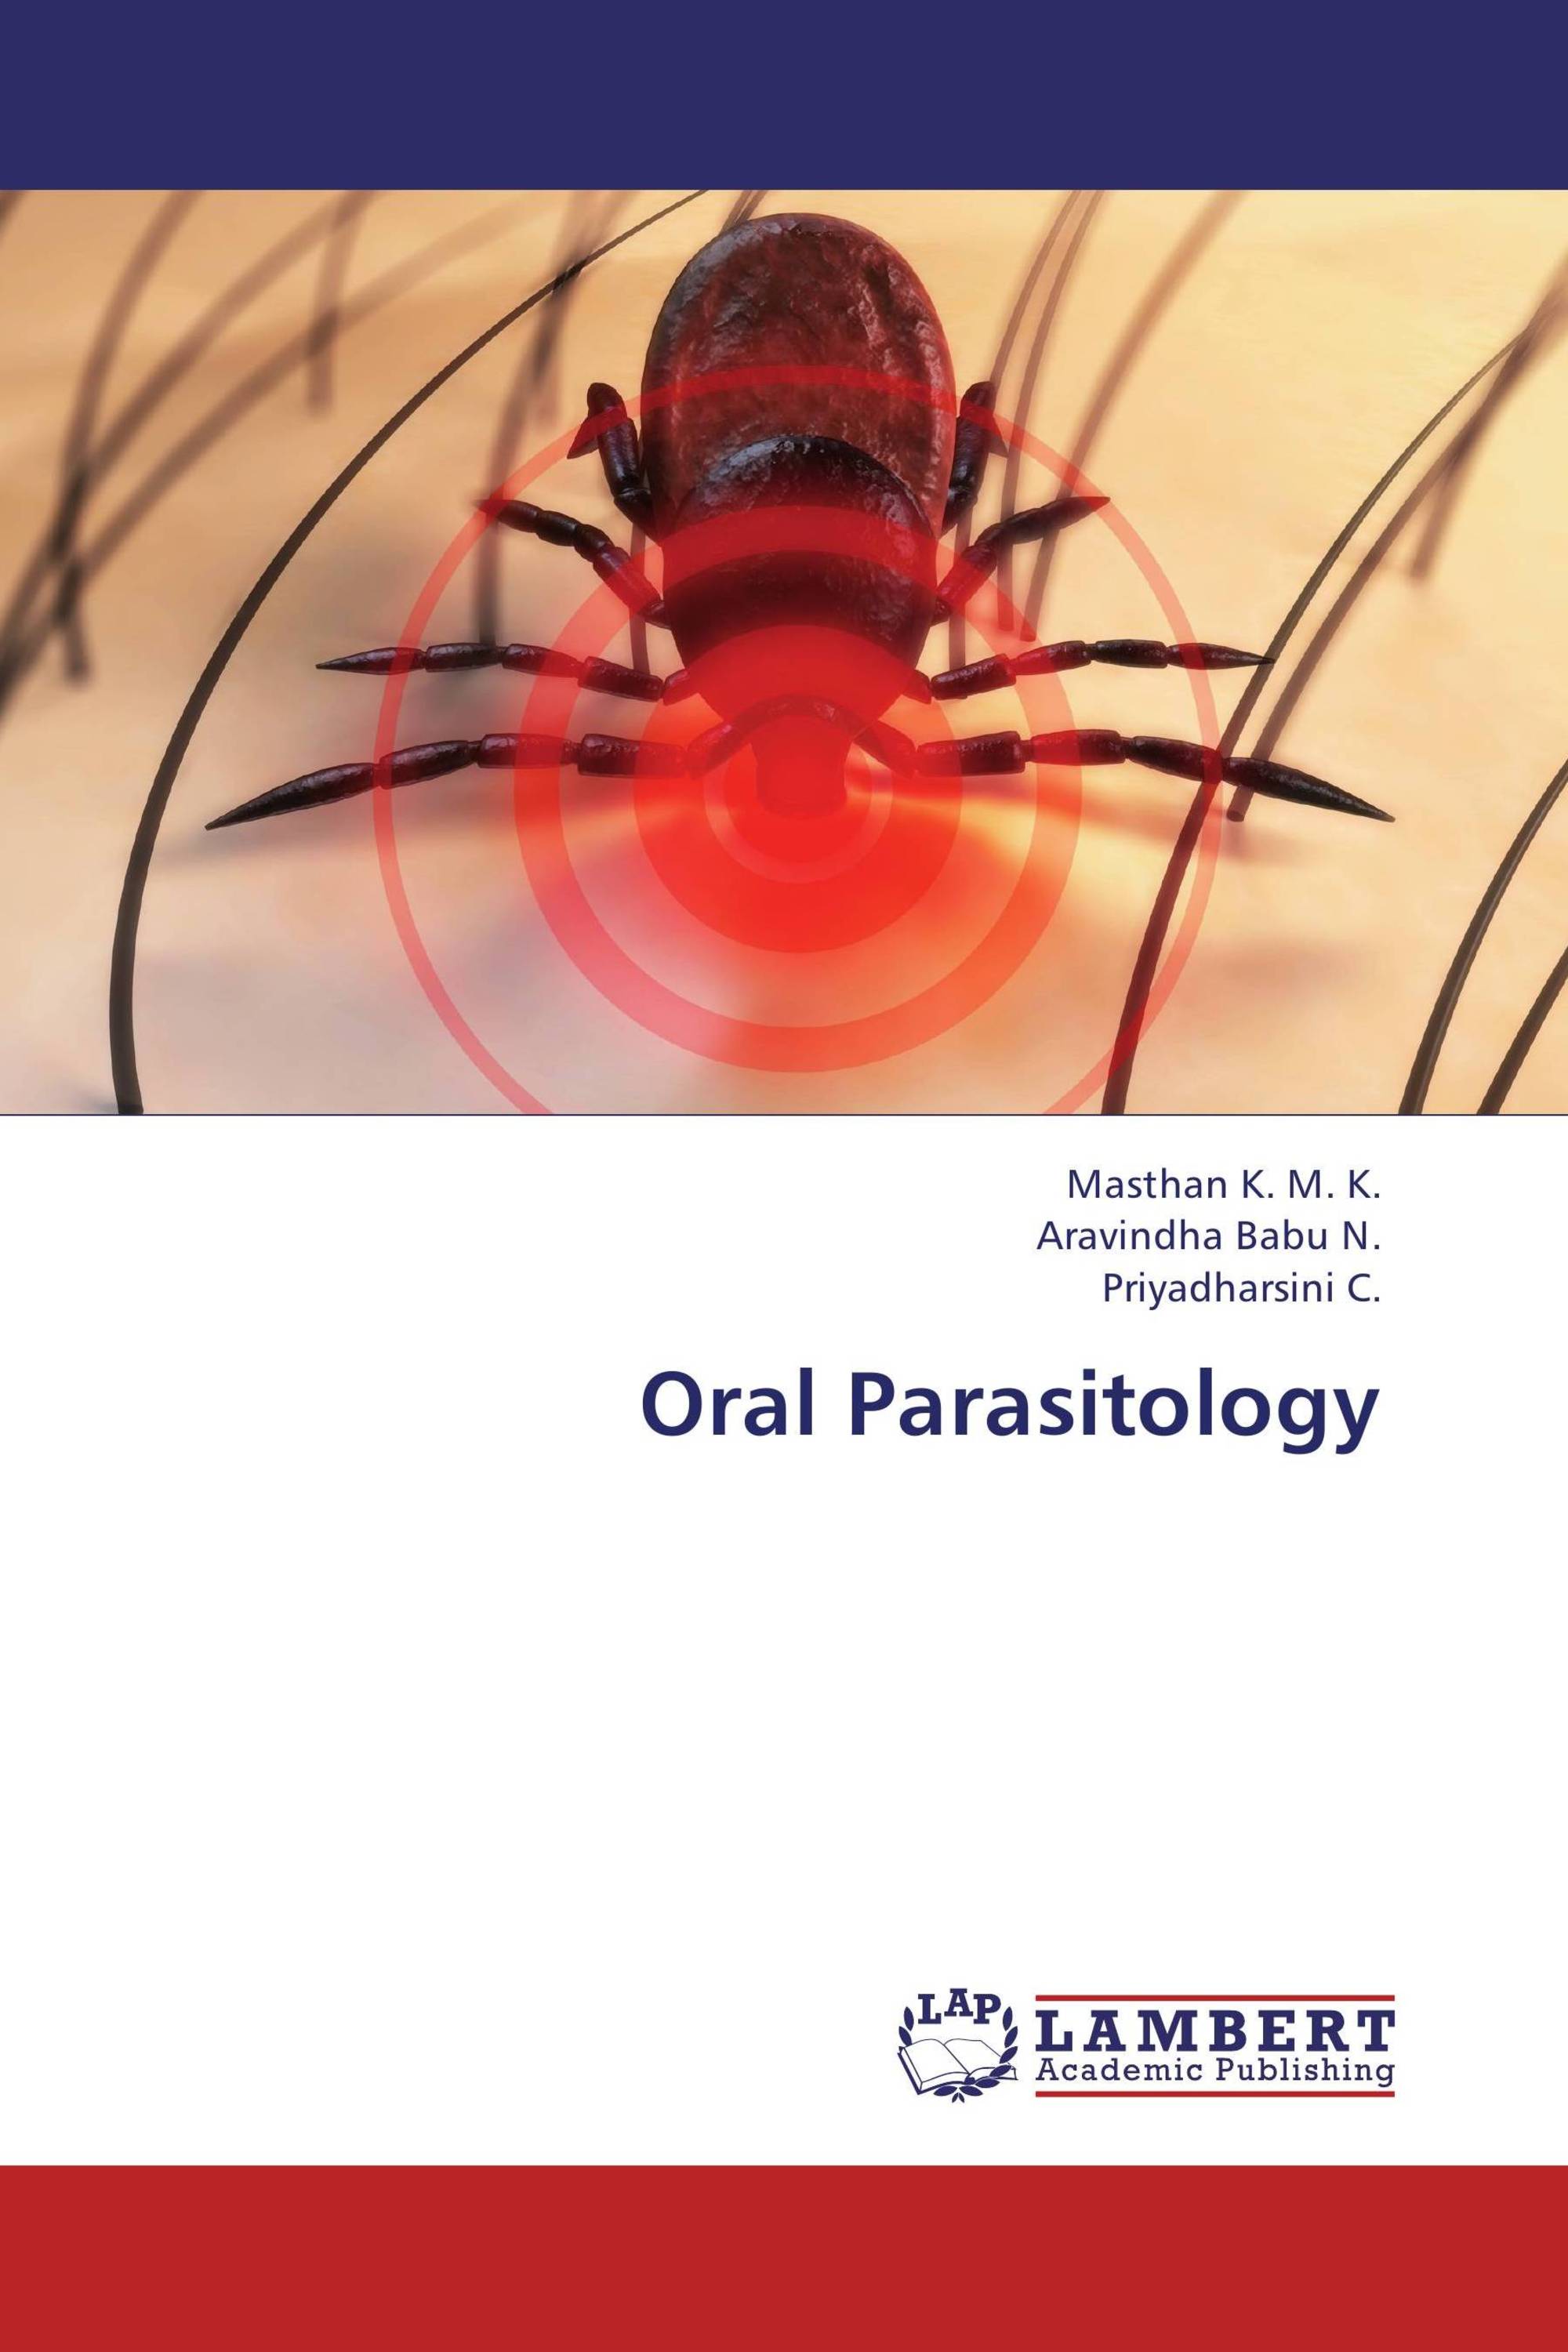 Thesis about parasitology